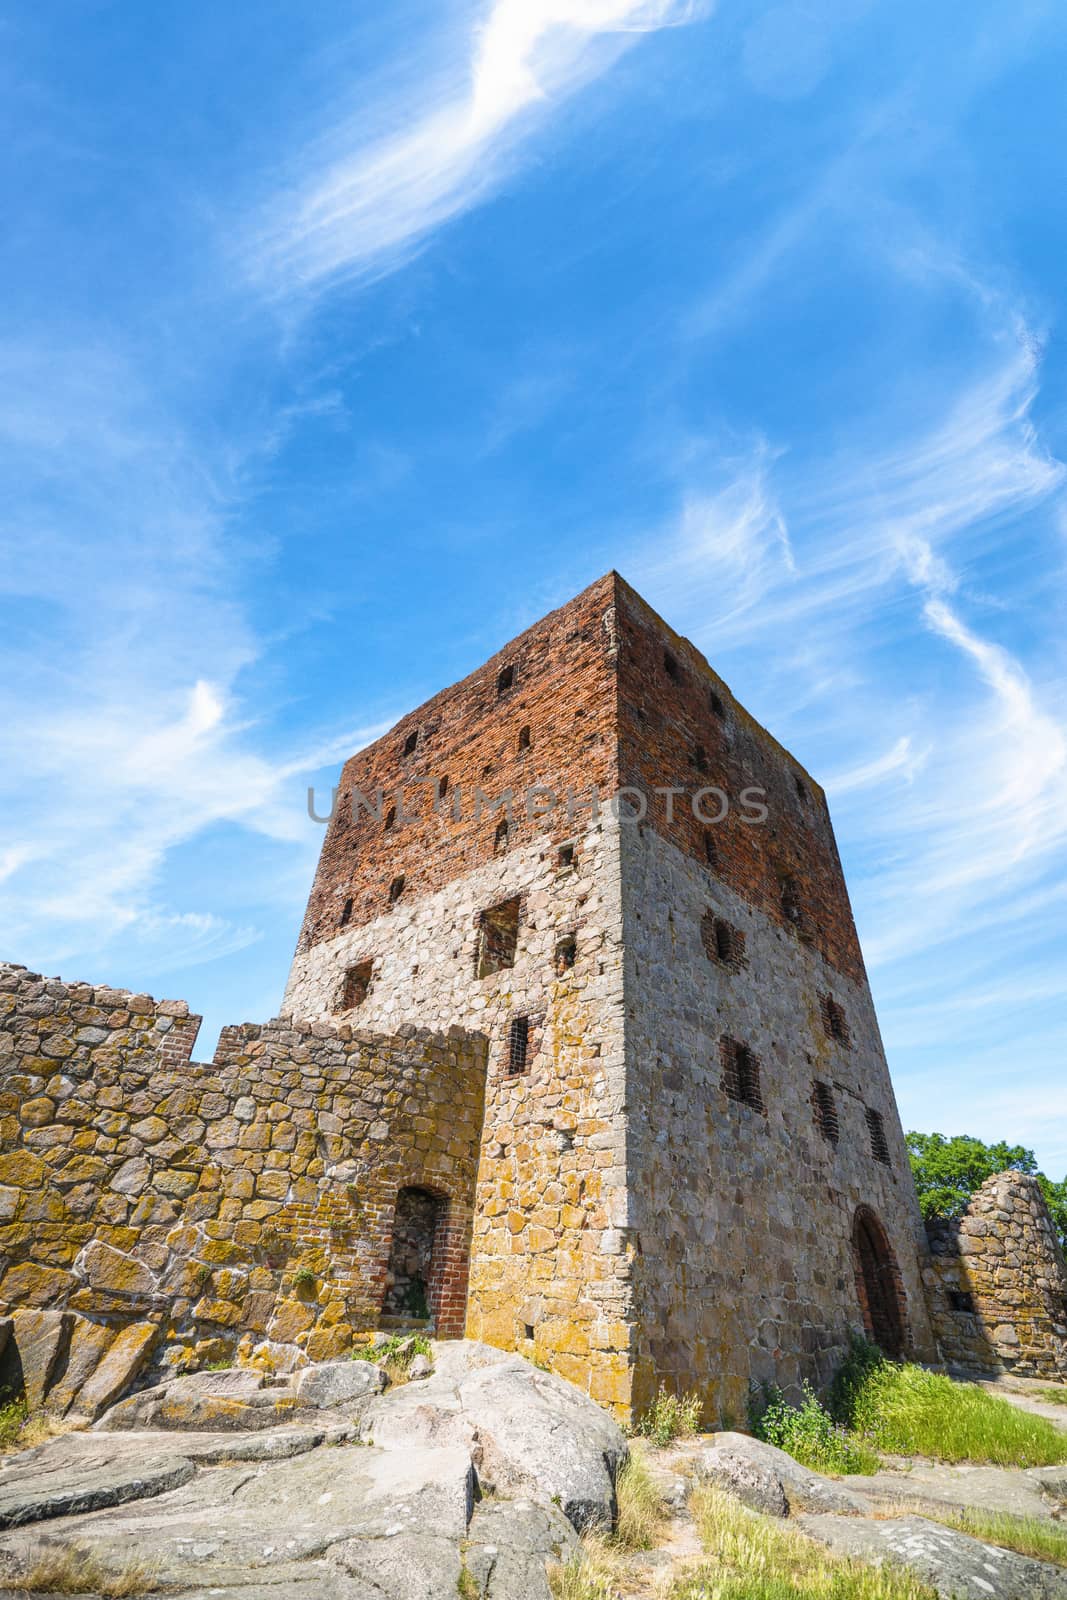 Old castle ruin in the summer under a blue sky with several windows and a brick wall